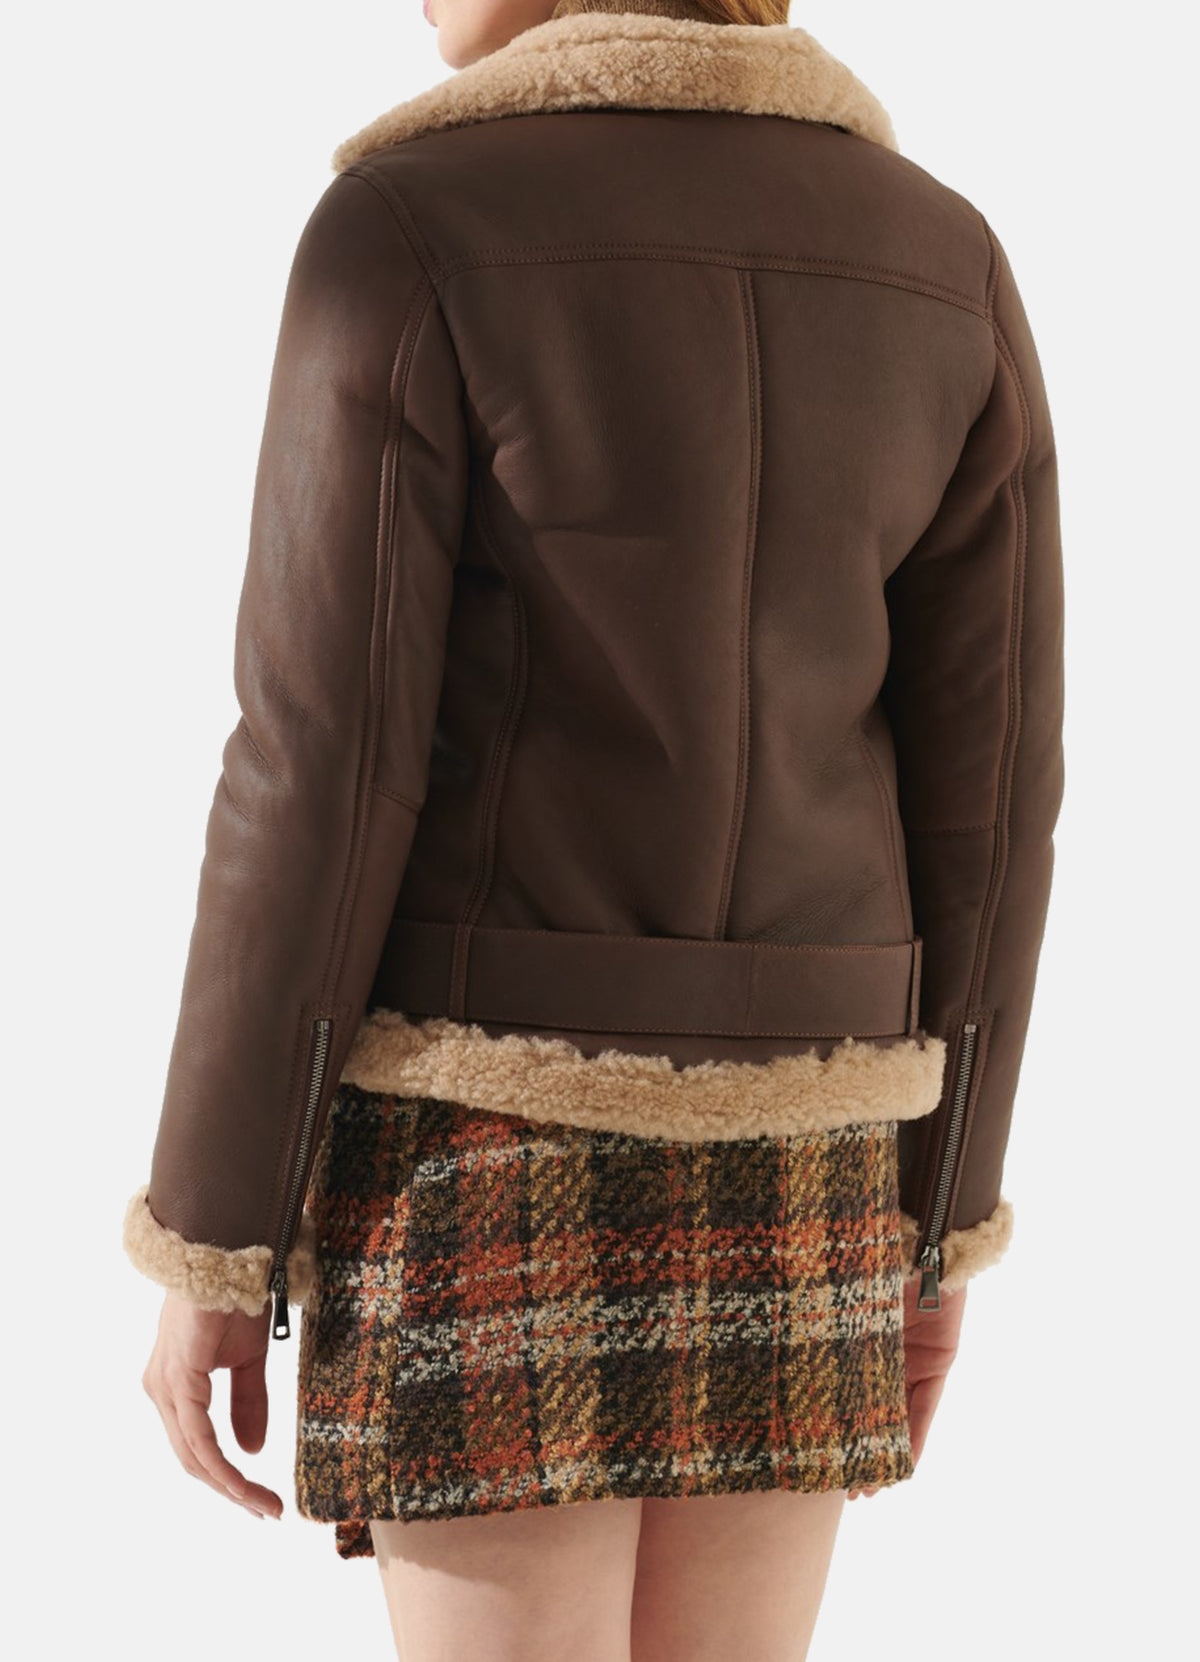 Womens Chocolate Brown Shearling Leather Jacket | Elite Jacket